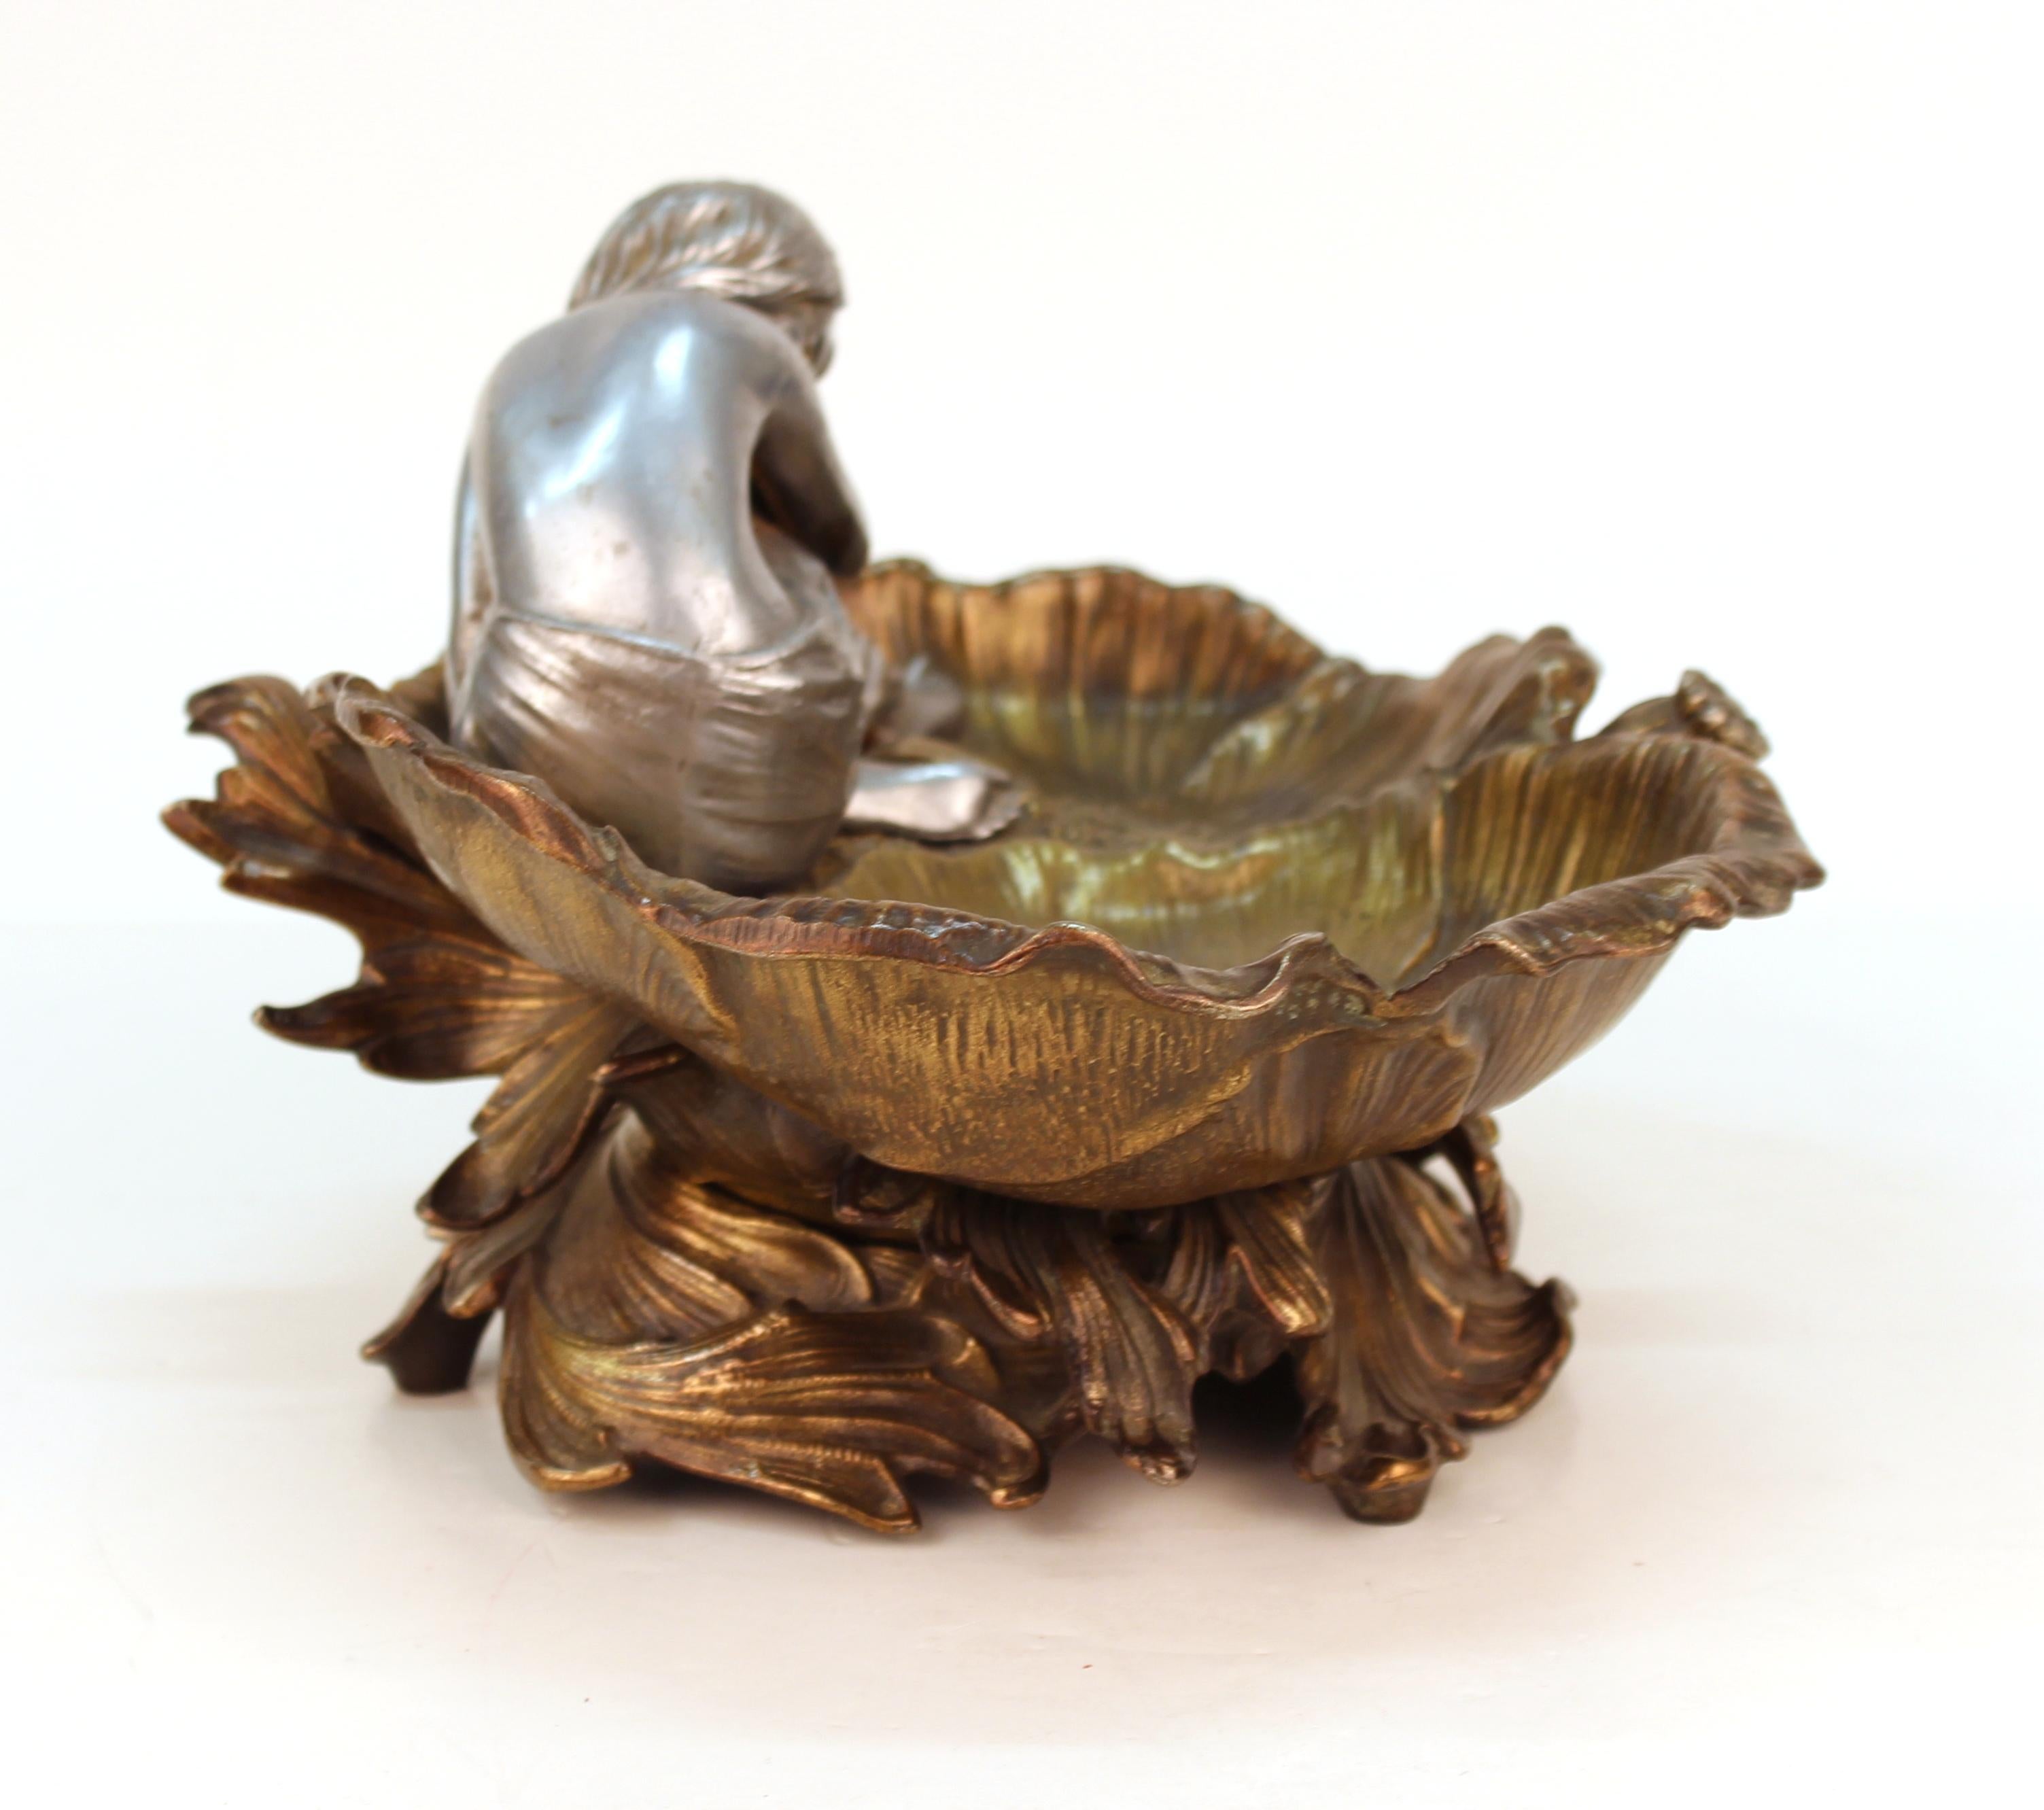 20th Century Art Nouveau Bronze Figural Card Tray or Vide-Poche with Nymph